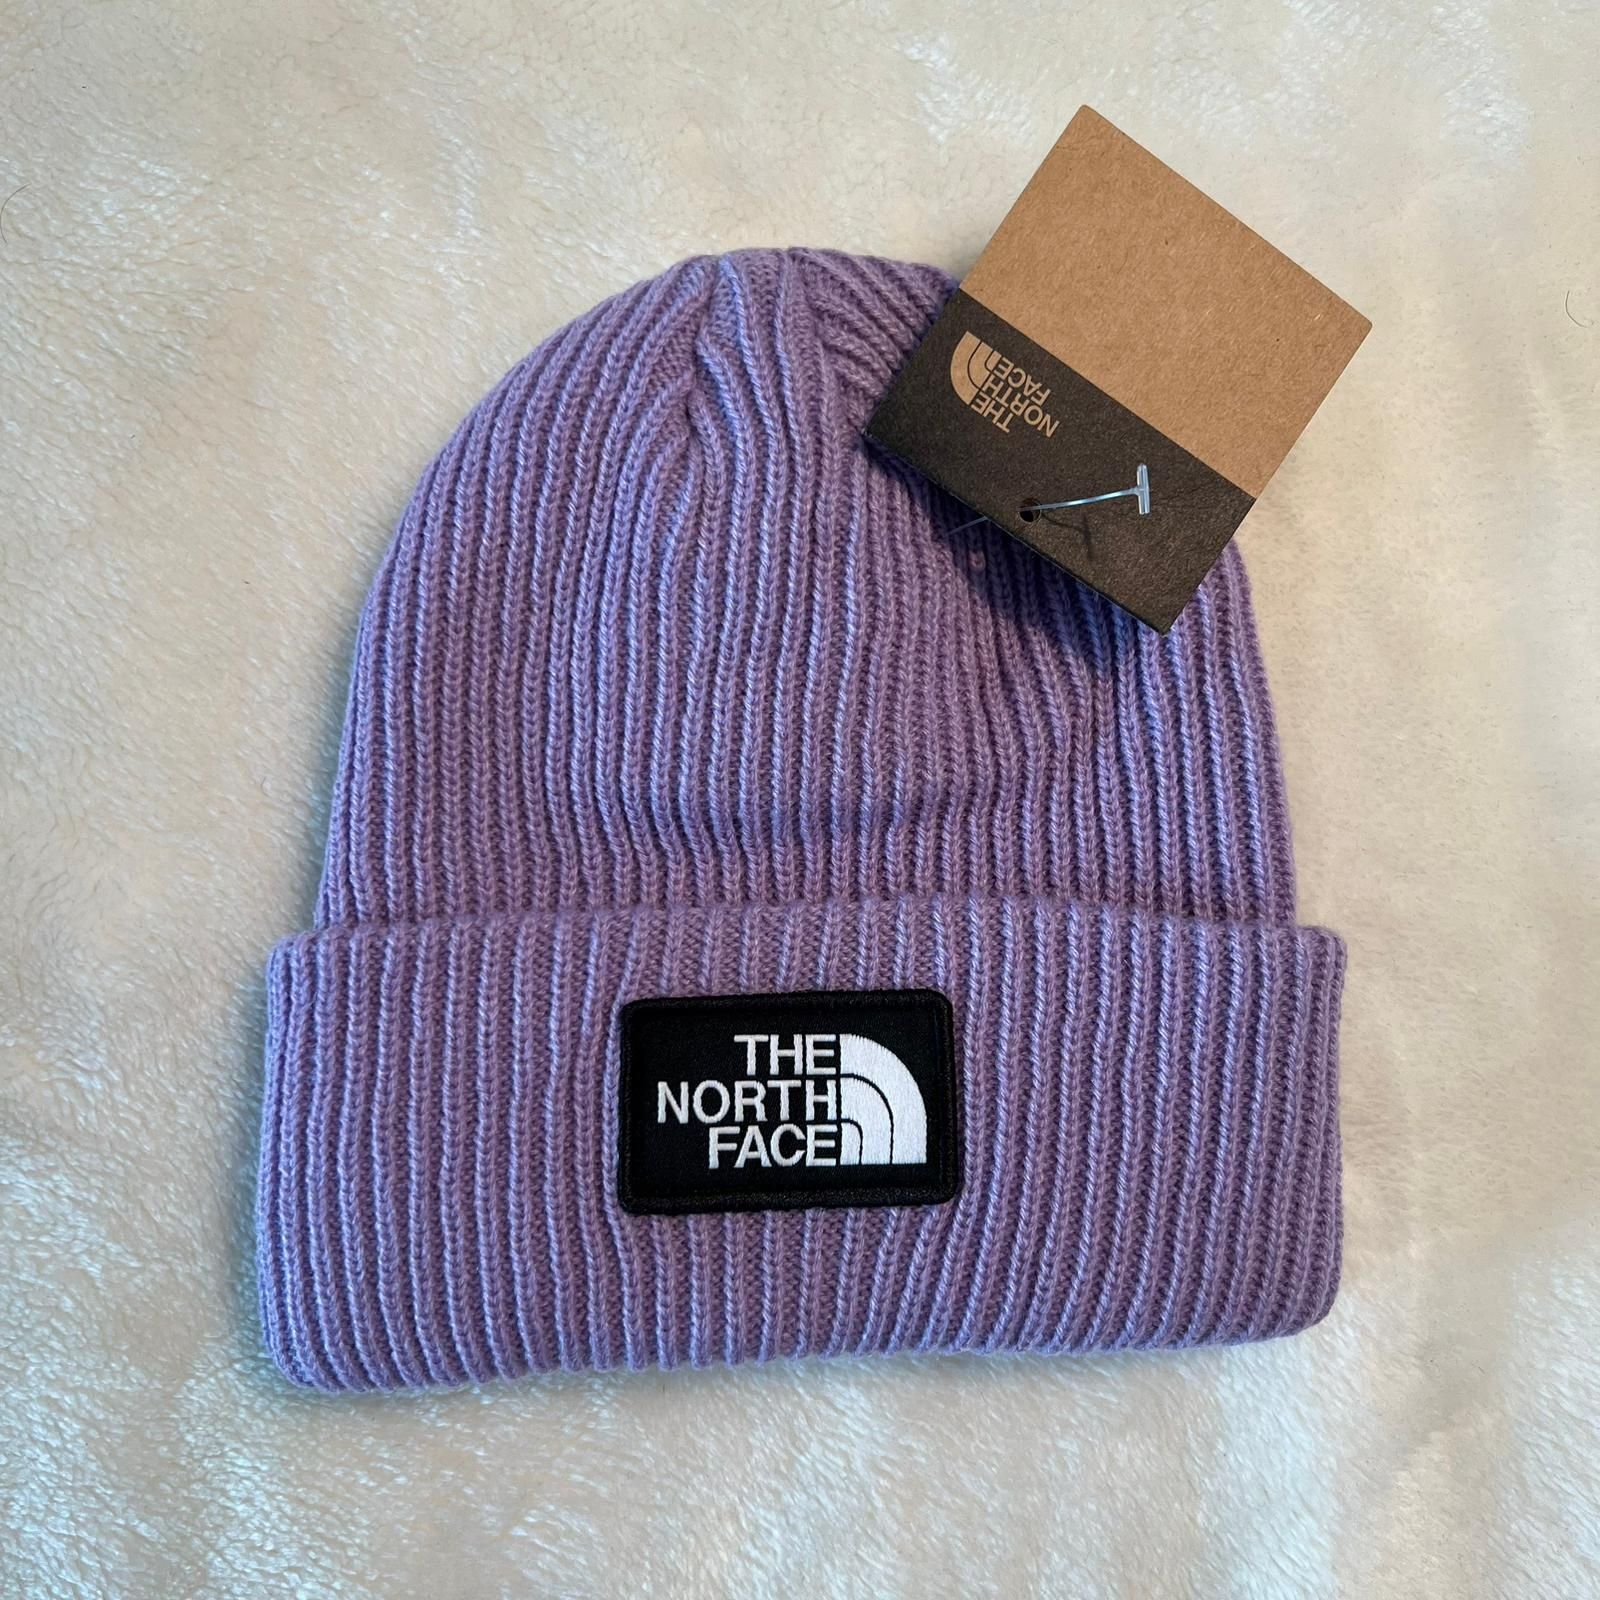 Gorros - The North Face